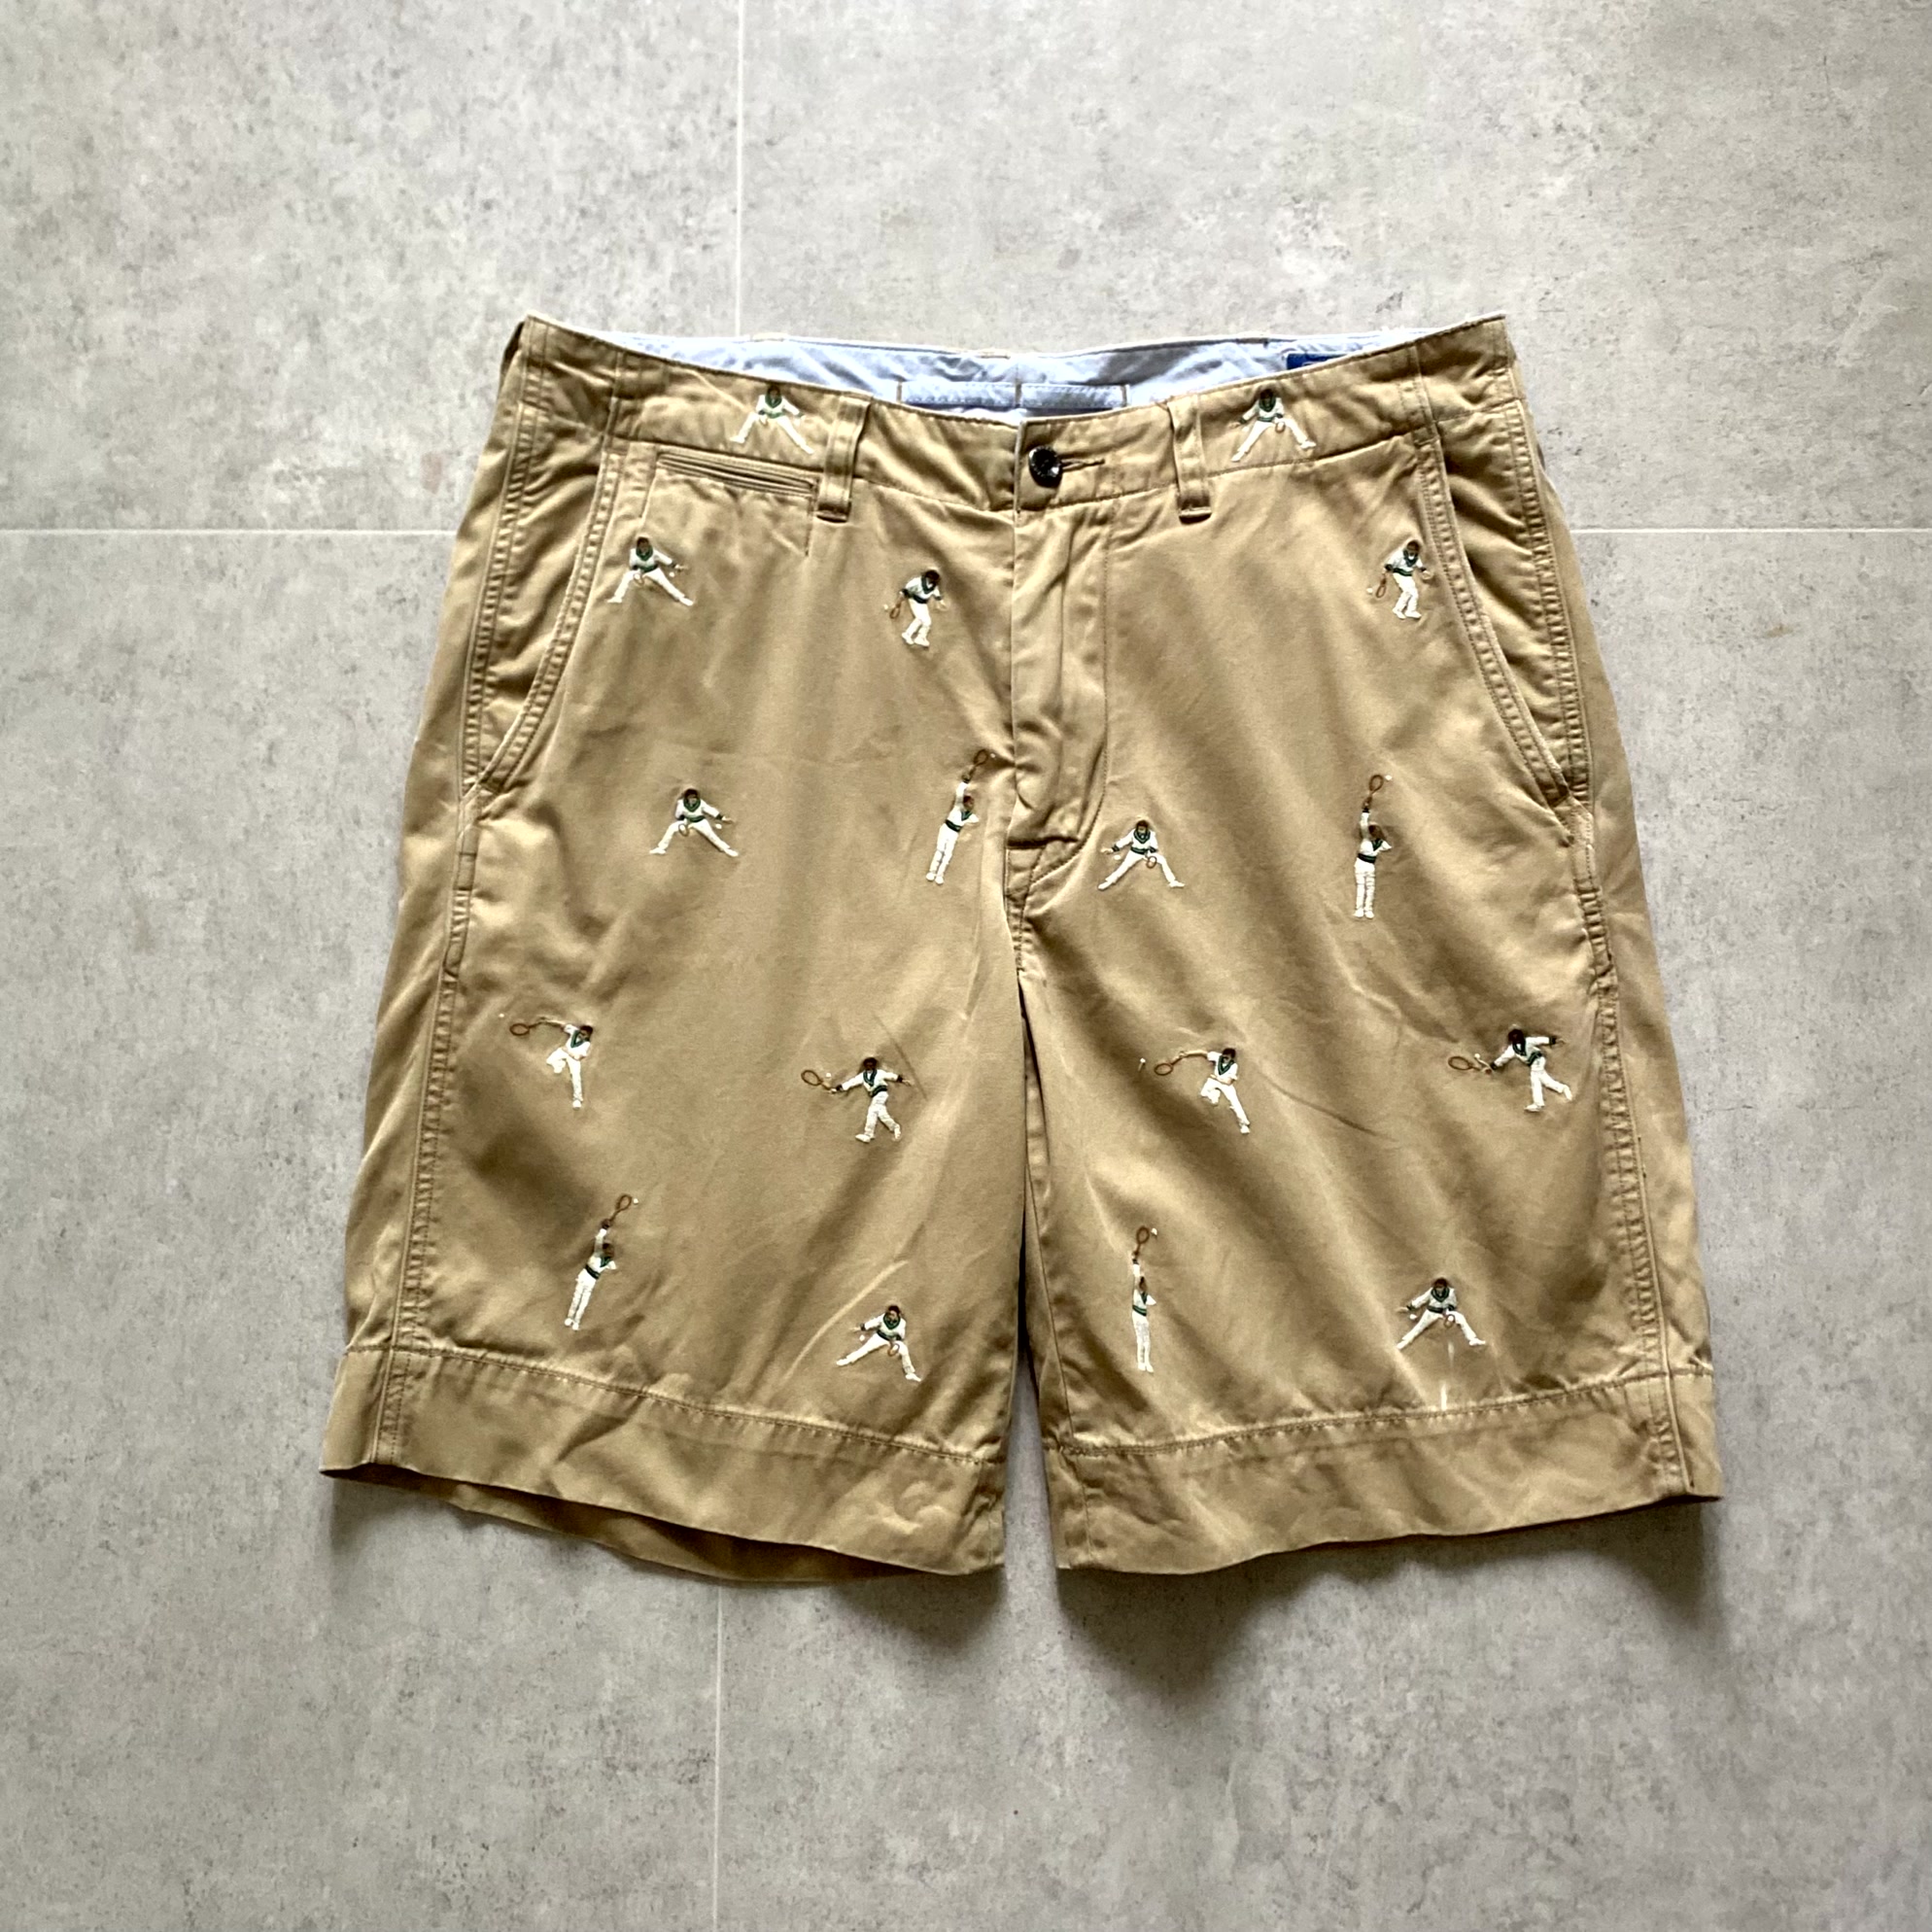 Polo Ralph Lauren Cricket Playing Embroidered Shorts 34 Size - 체리피커